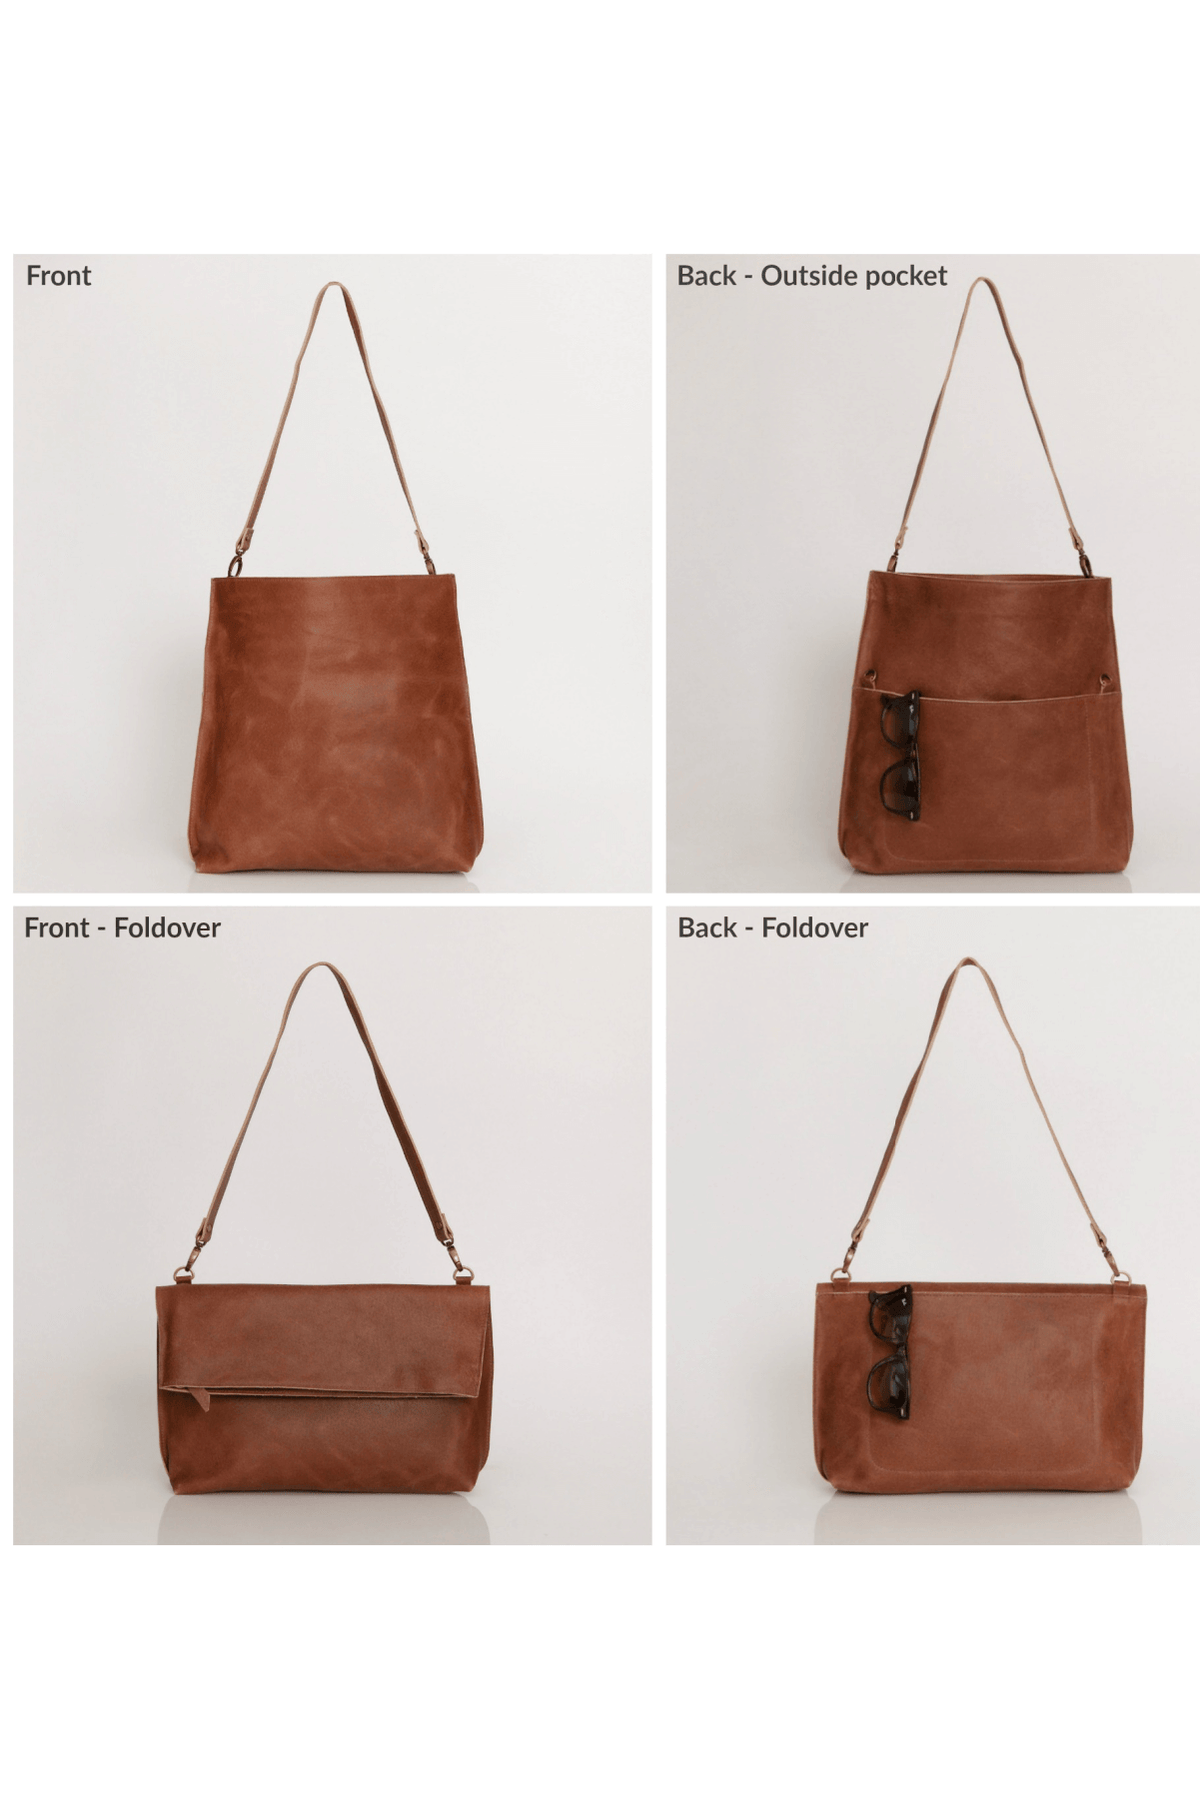 Leather Convertible Purse Bag, Tote, Crossbody, Clutch | Mayko Bags